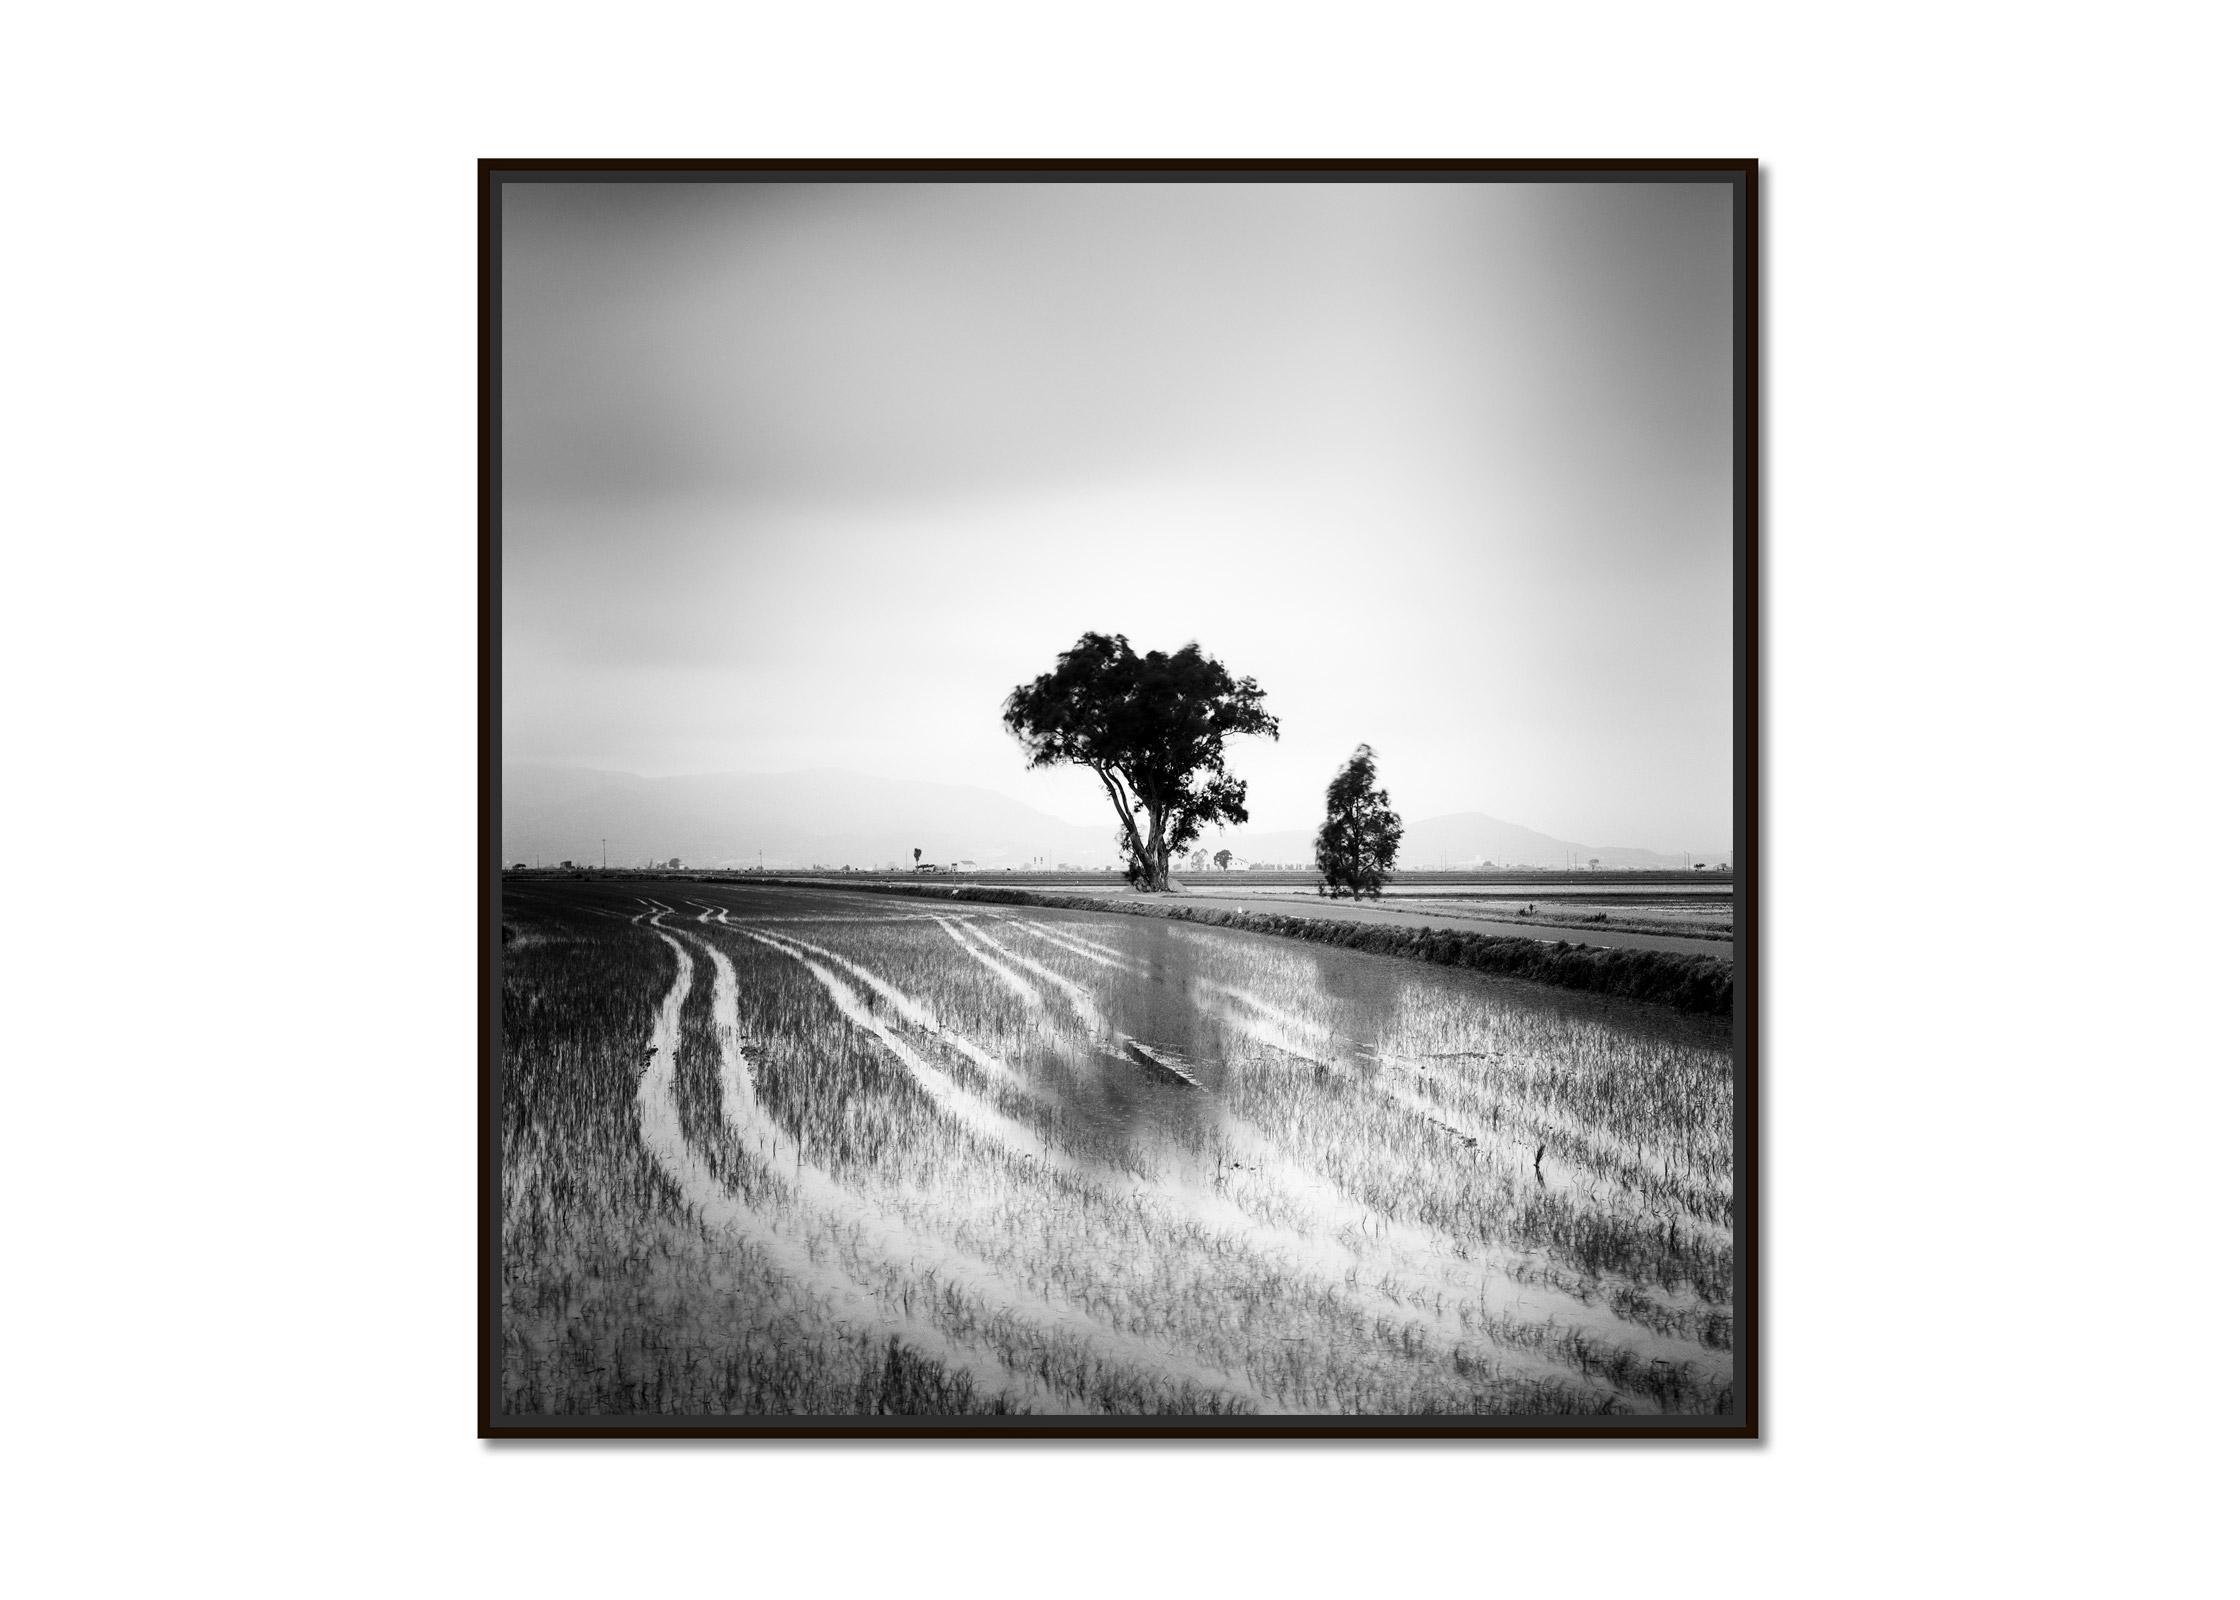 Lines in the Ricefield, Spain, black and white long exposure landscape photo - Photograph by Gerald Berghammer